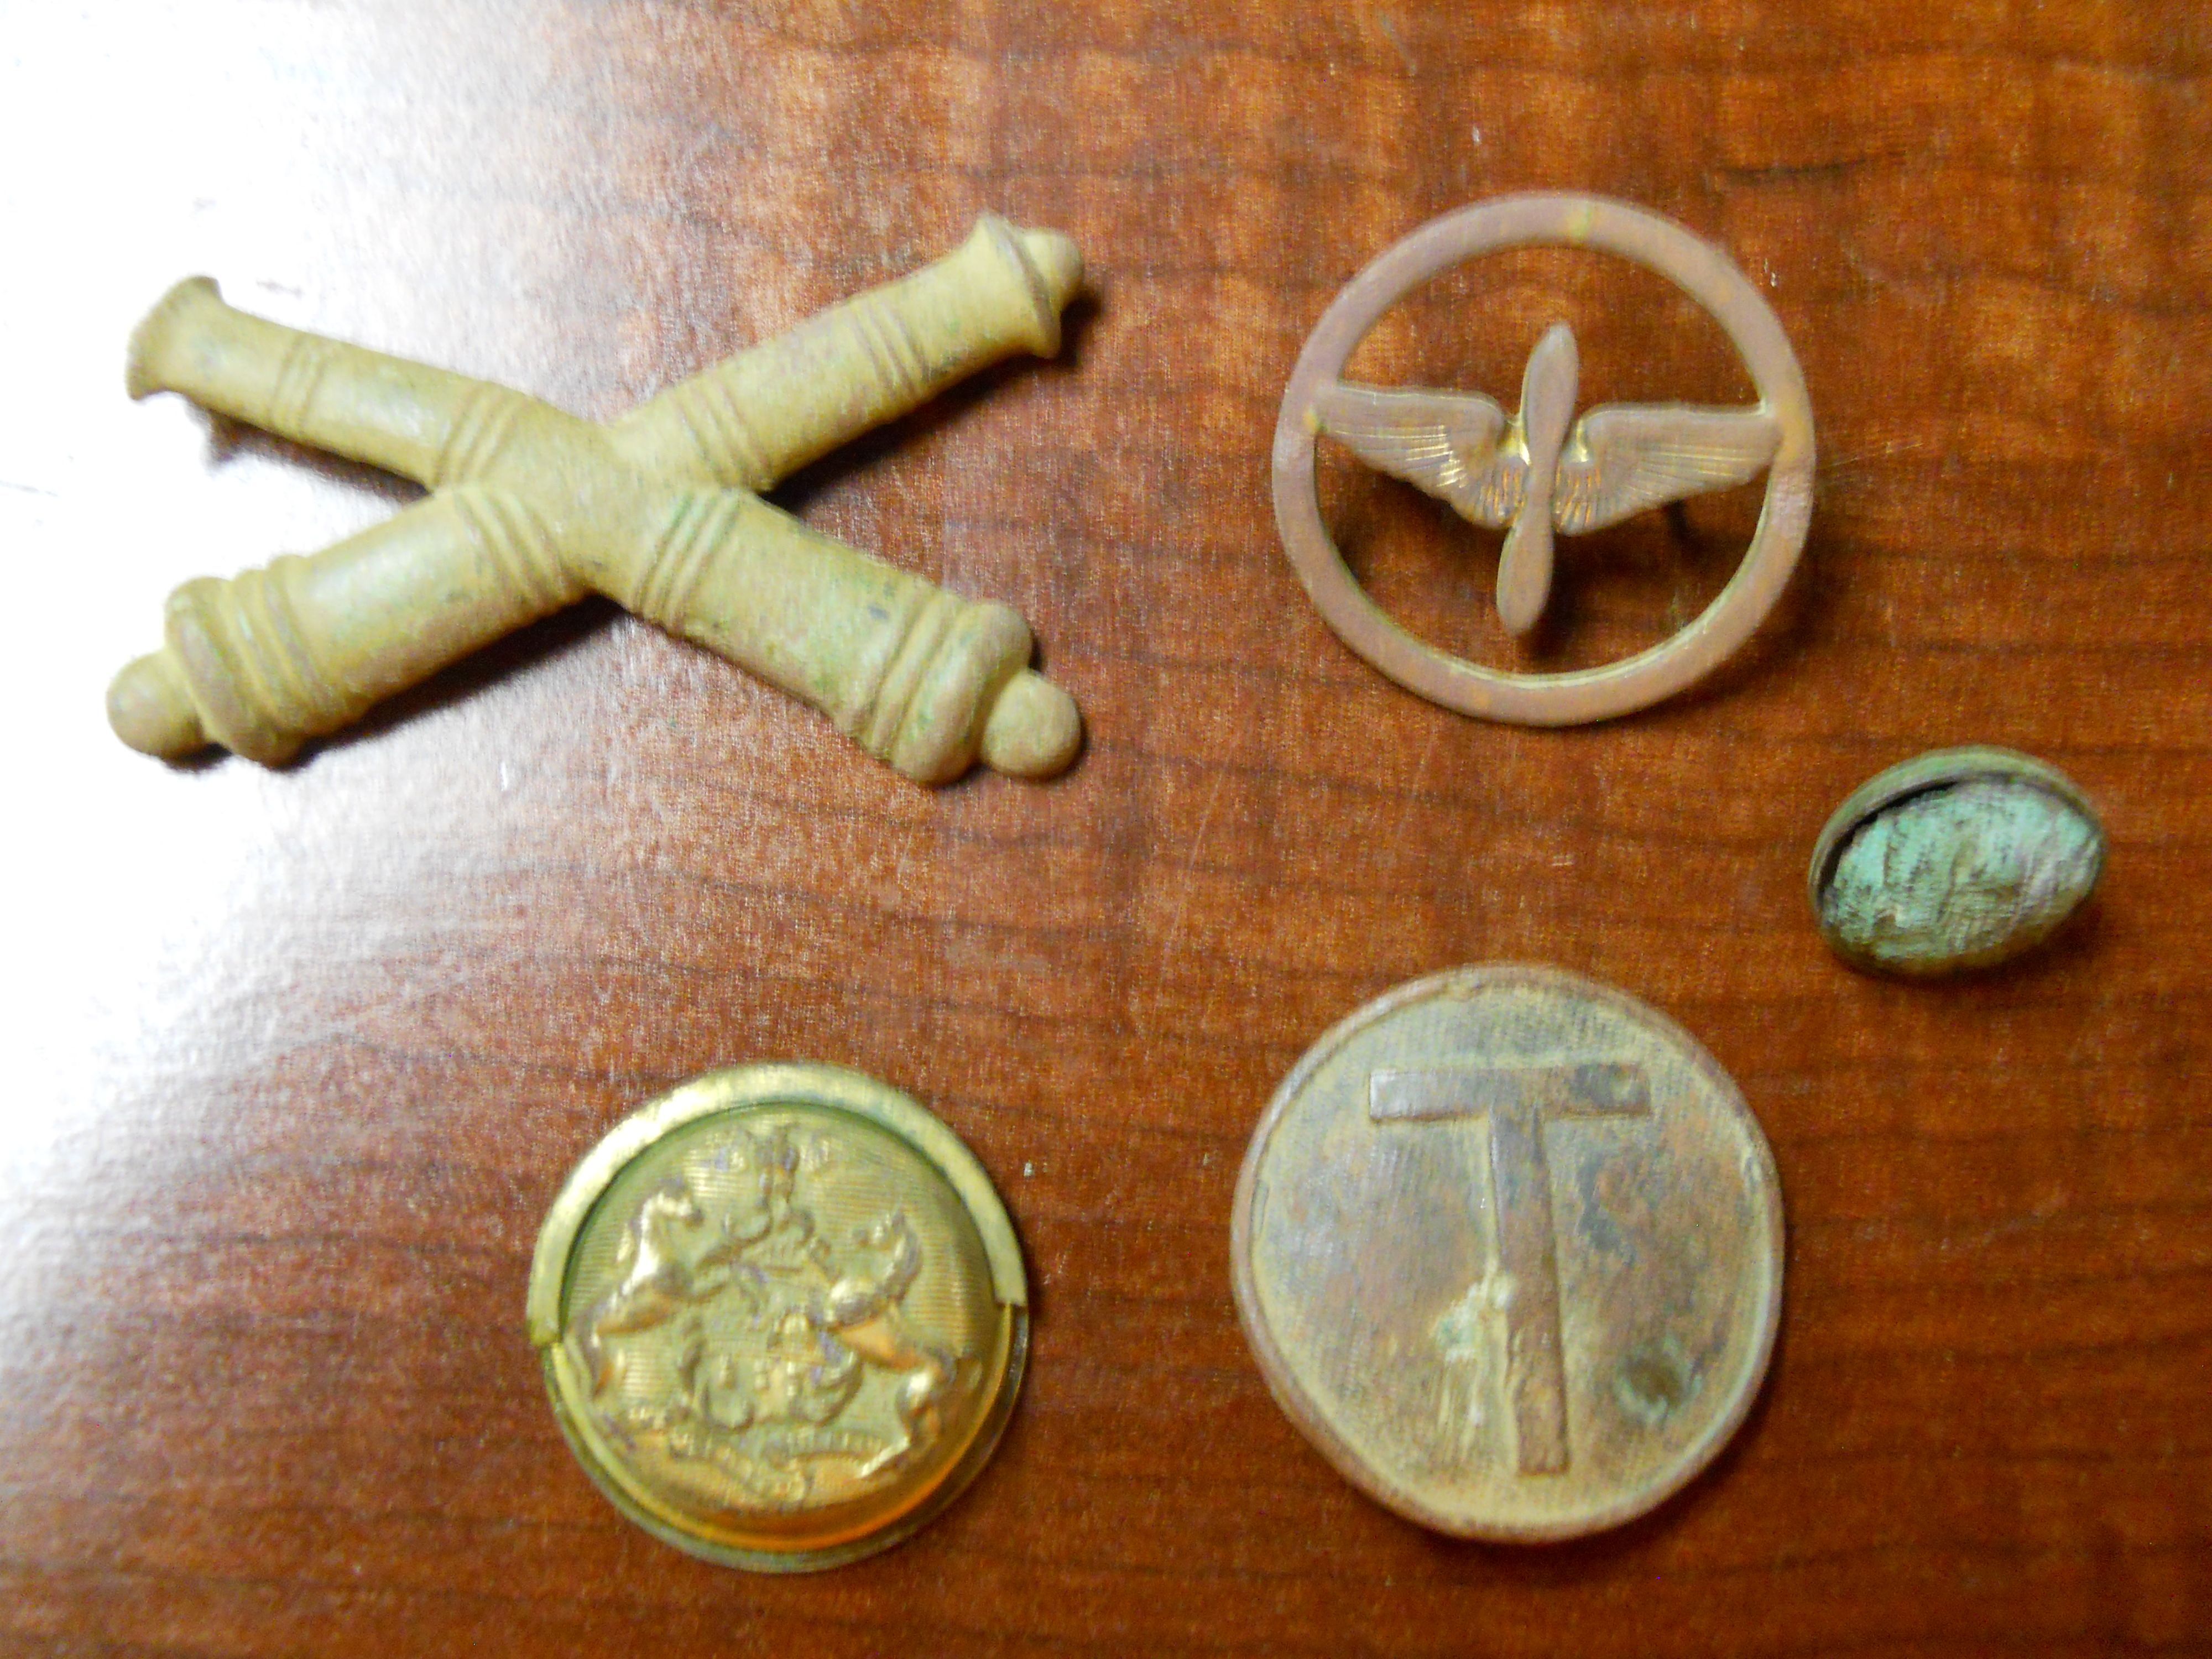 military relics